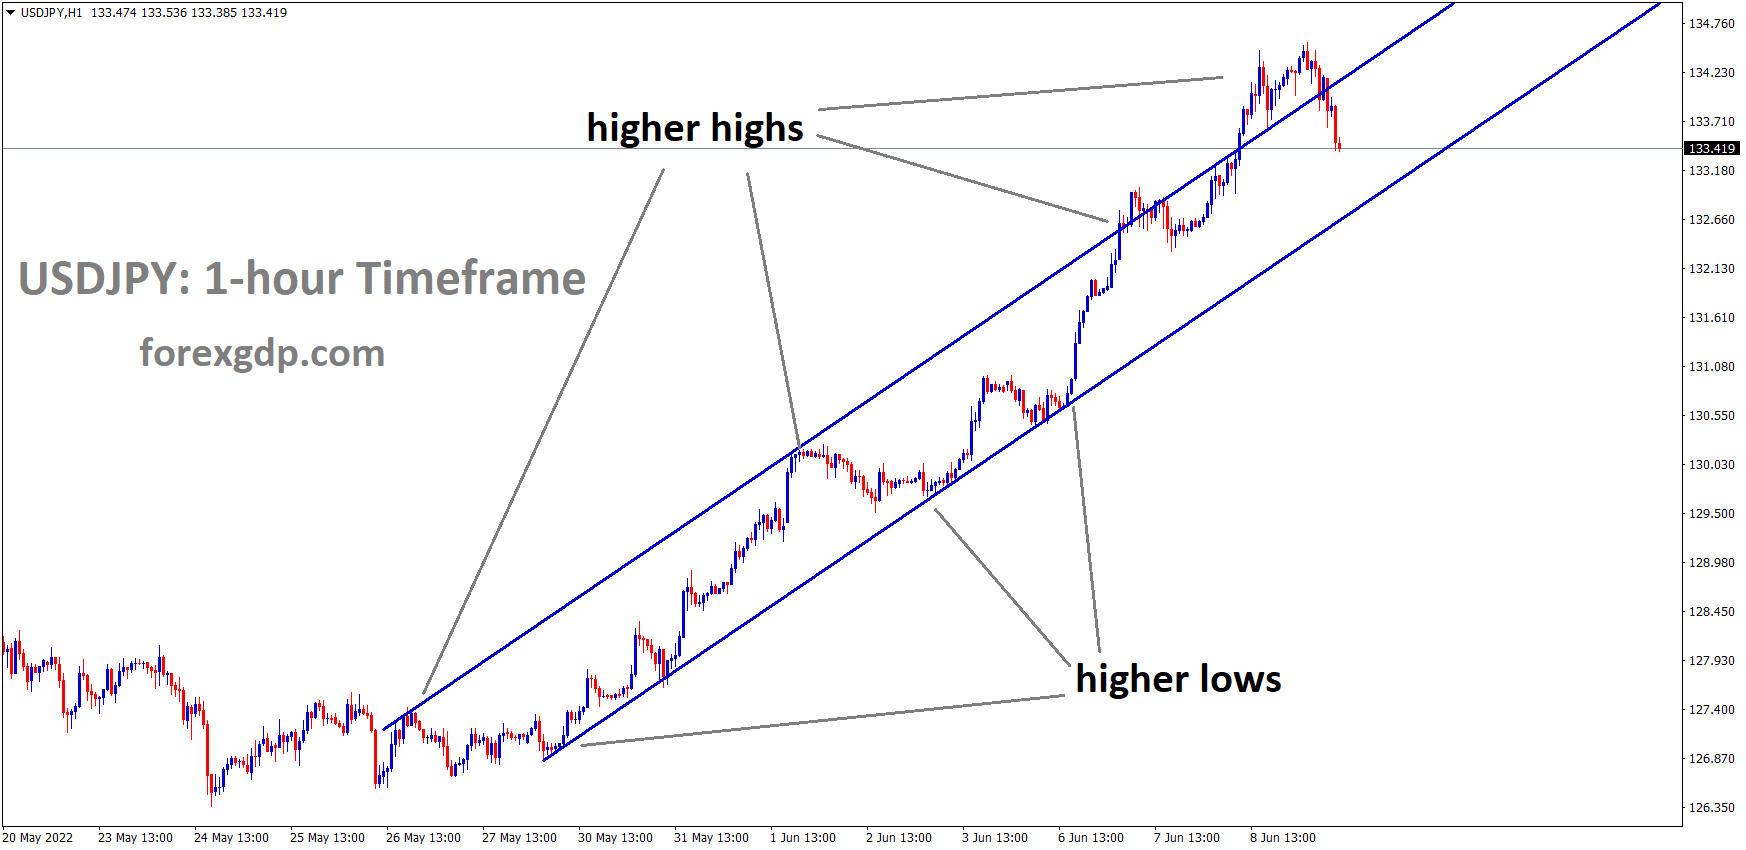 USDJPY H1 Time Frame Analysis Market is moving in an Ascending channel and the Market has Fallen from the higher high area of the channel